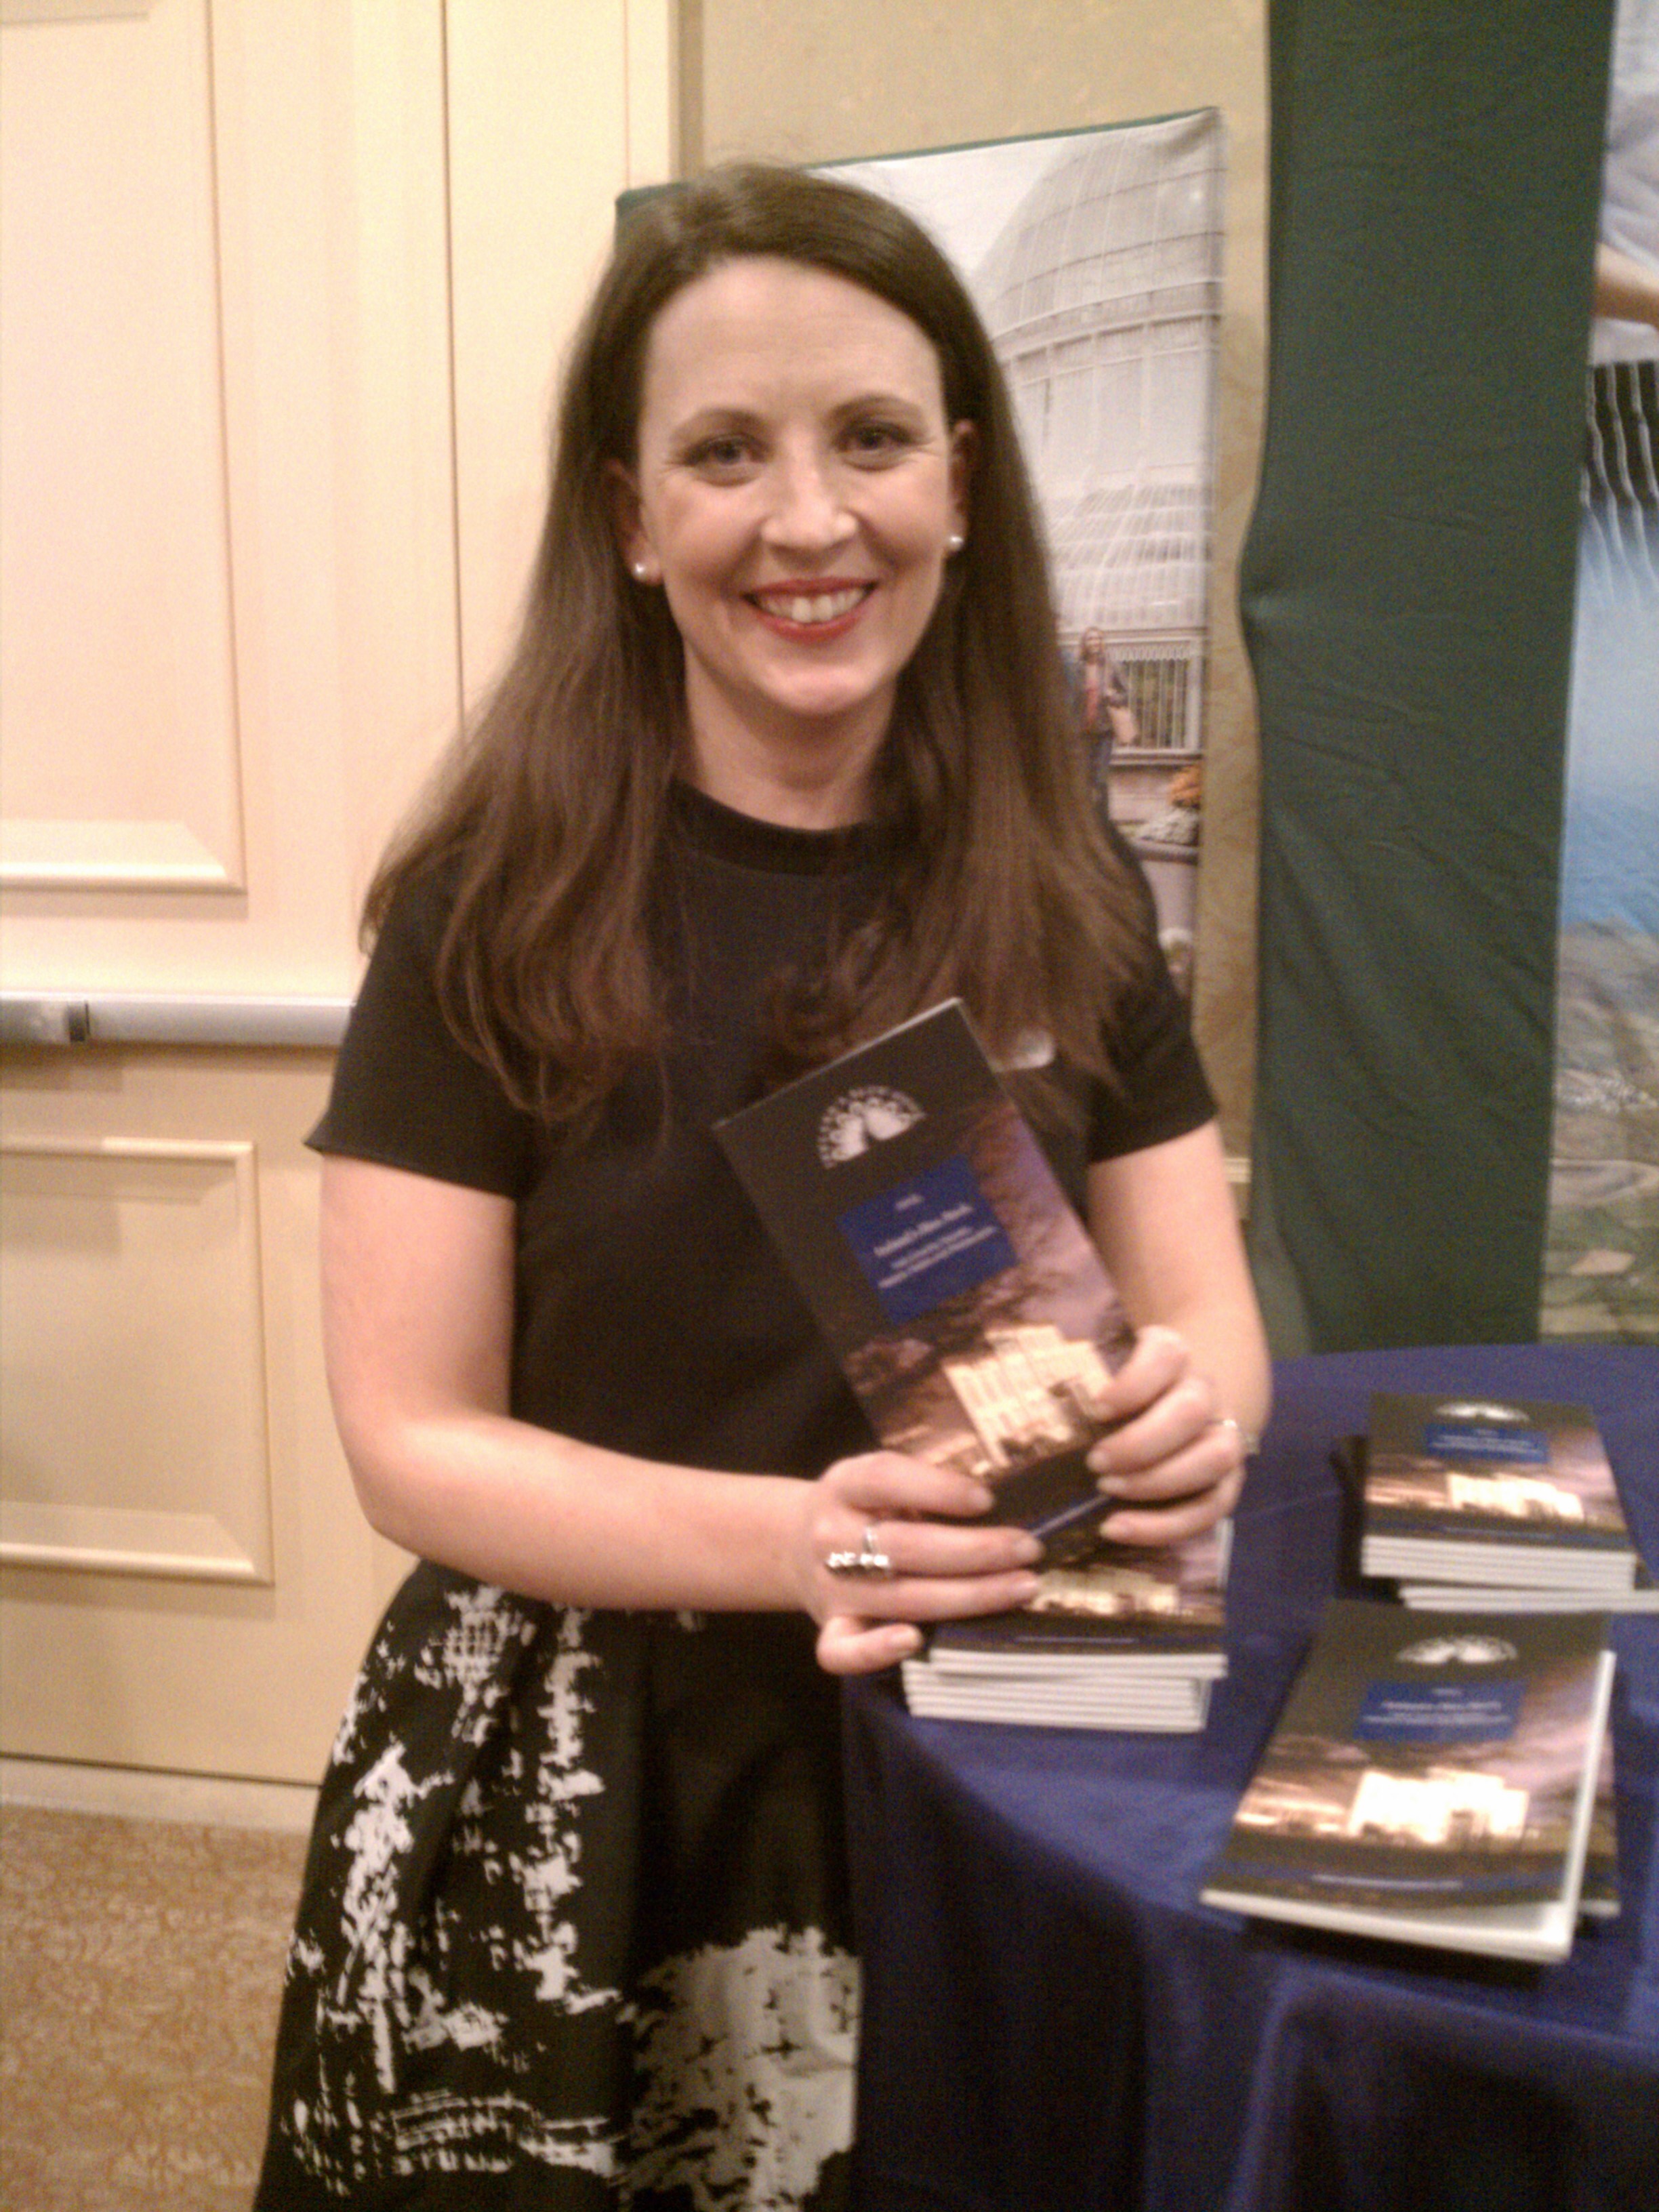 The lovely and super hospitable Michelle Maguire, head of Marketing for Ireland's Blue Book Guide. Photo by Vida Ghaffari